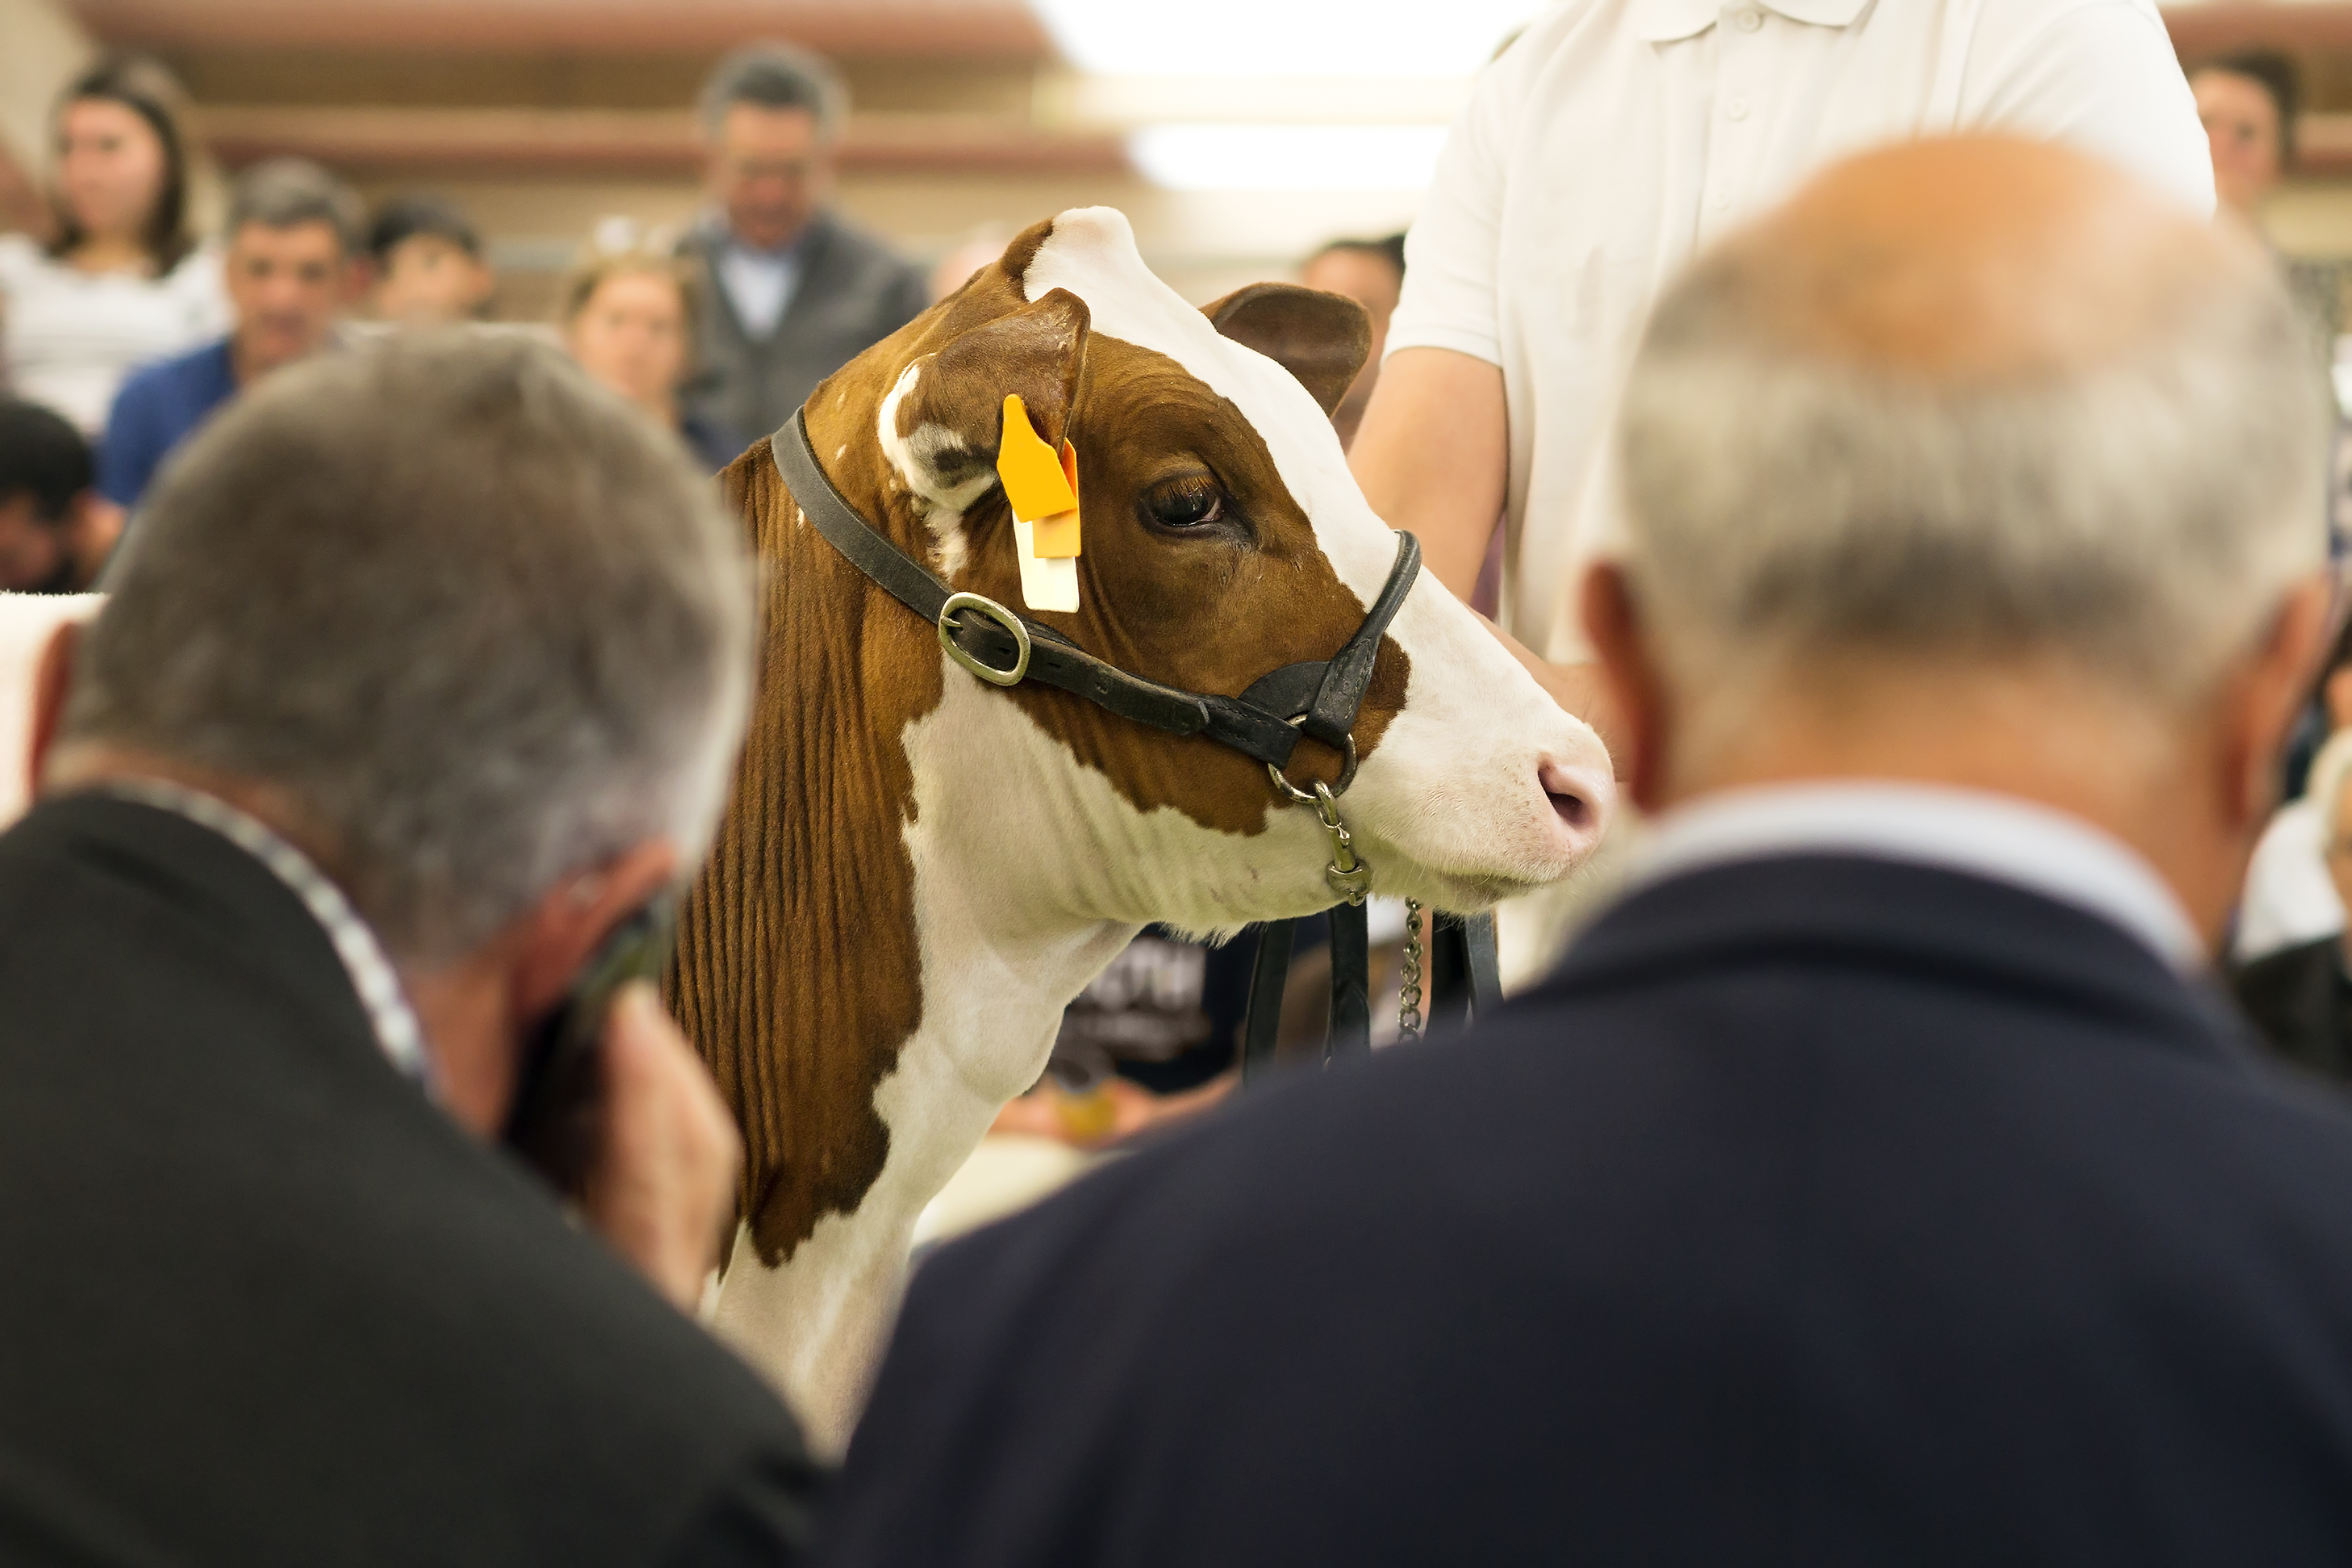 Audience view of a cow being presented at auction, wearing a halter and yellow ear tag.  Between the camera and the cow are seen the backs of two men in suits, one on a cell phone.